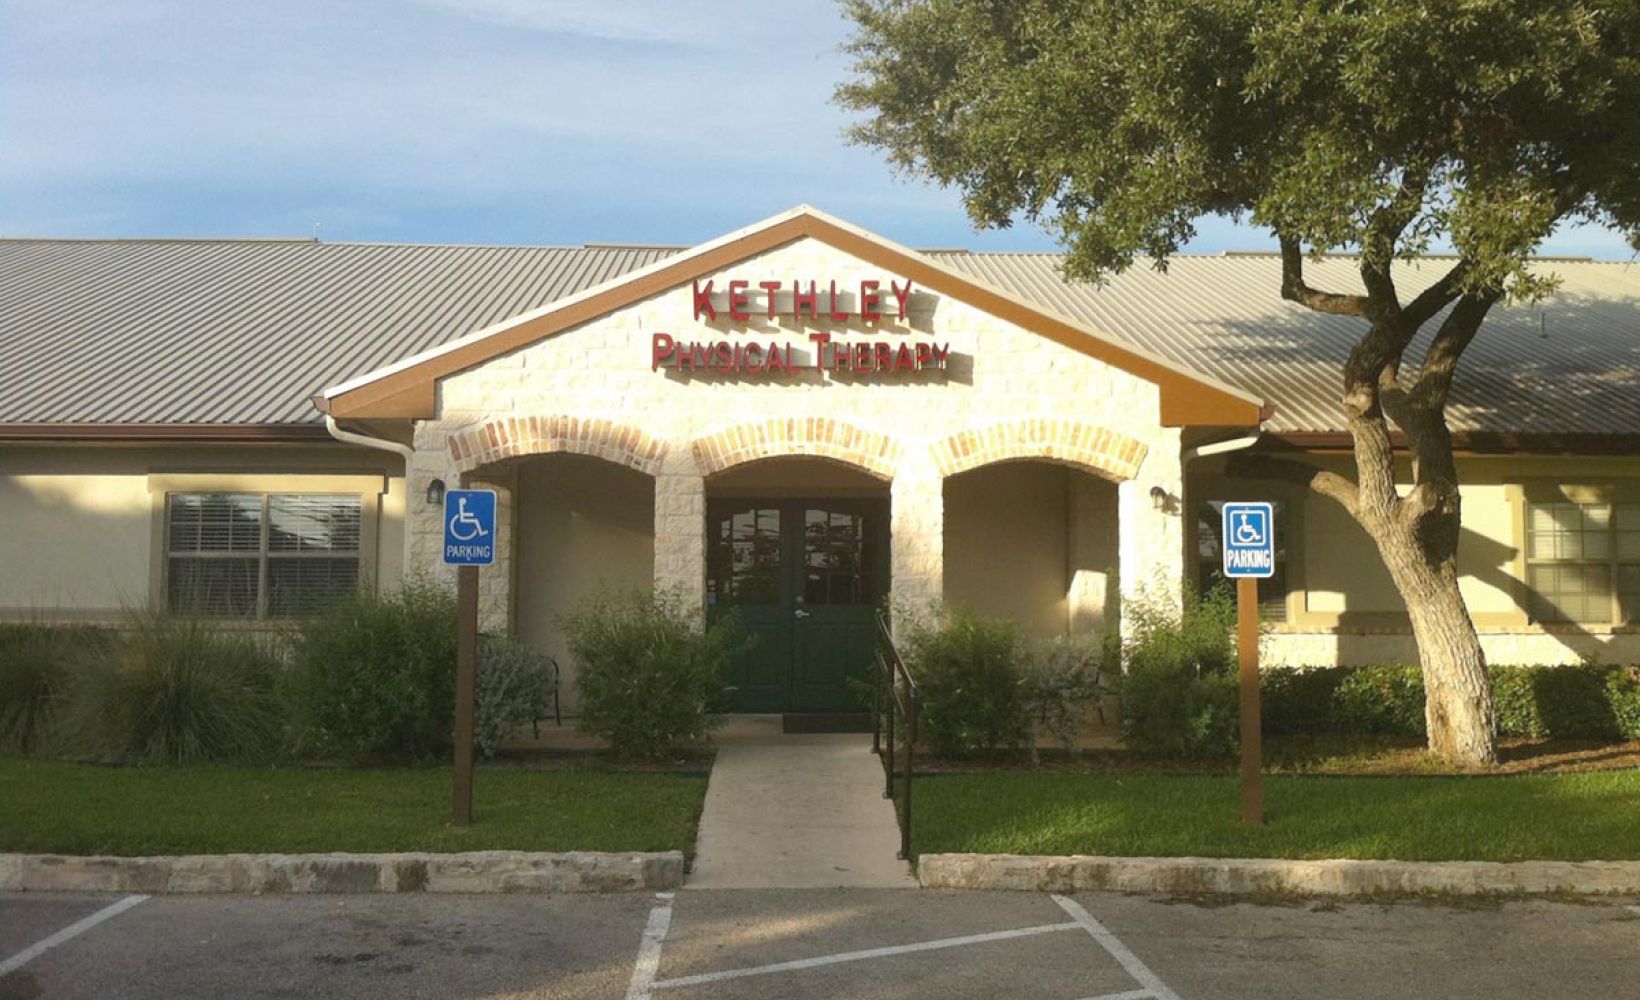 Kethley Physical Therapy Dripping Springs